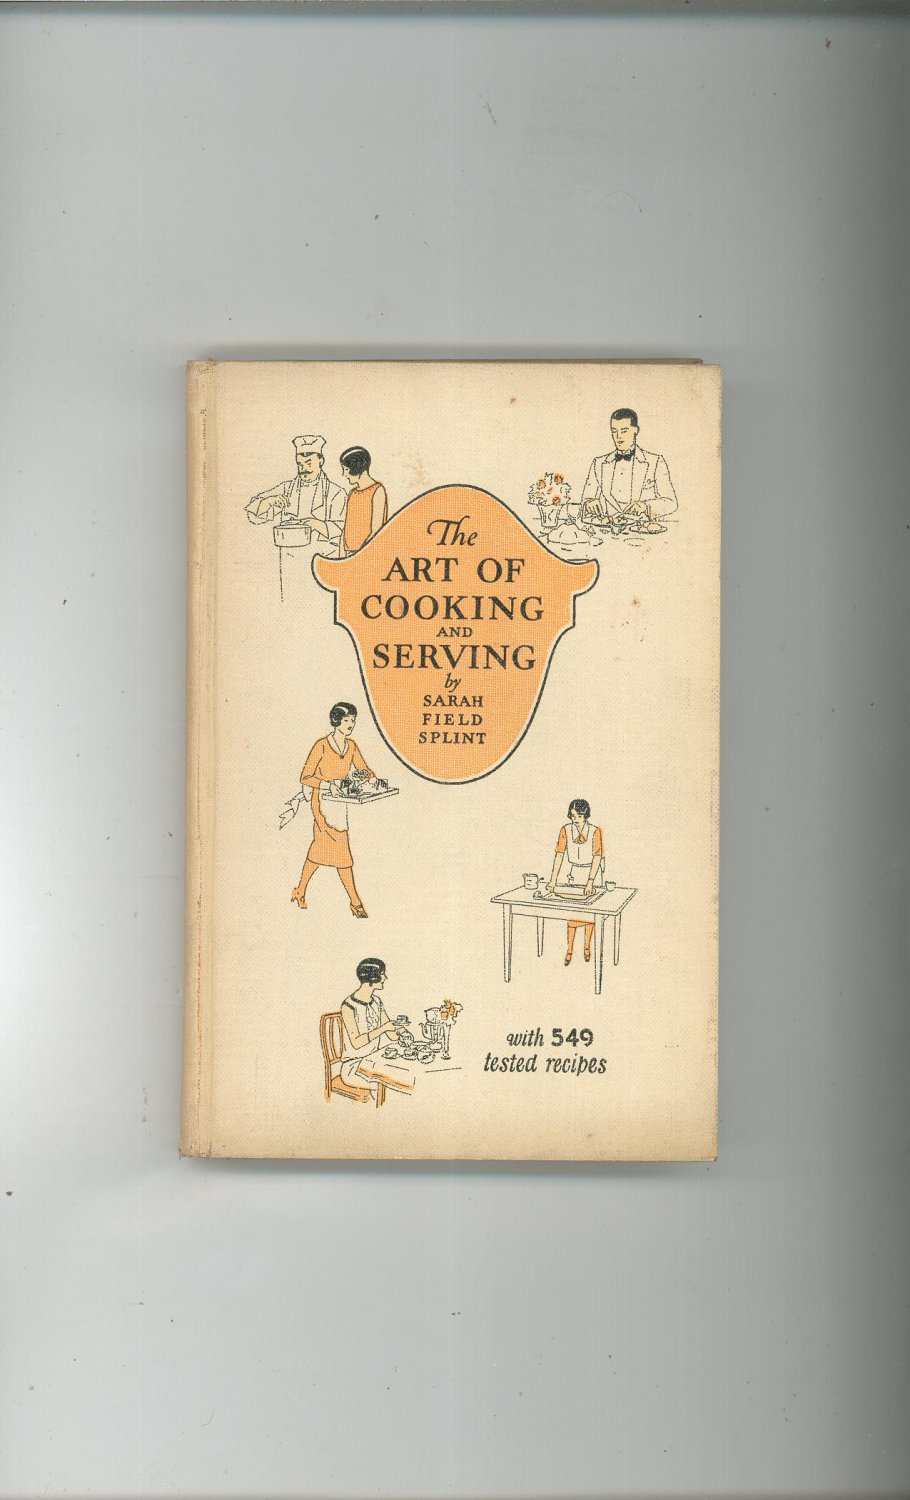 The Art Of Cooking And Serving Cookbook By Sarah Field